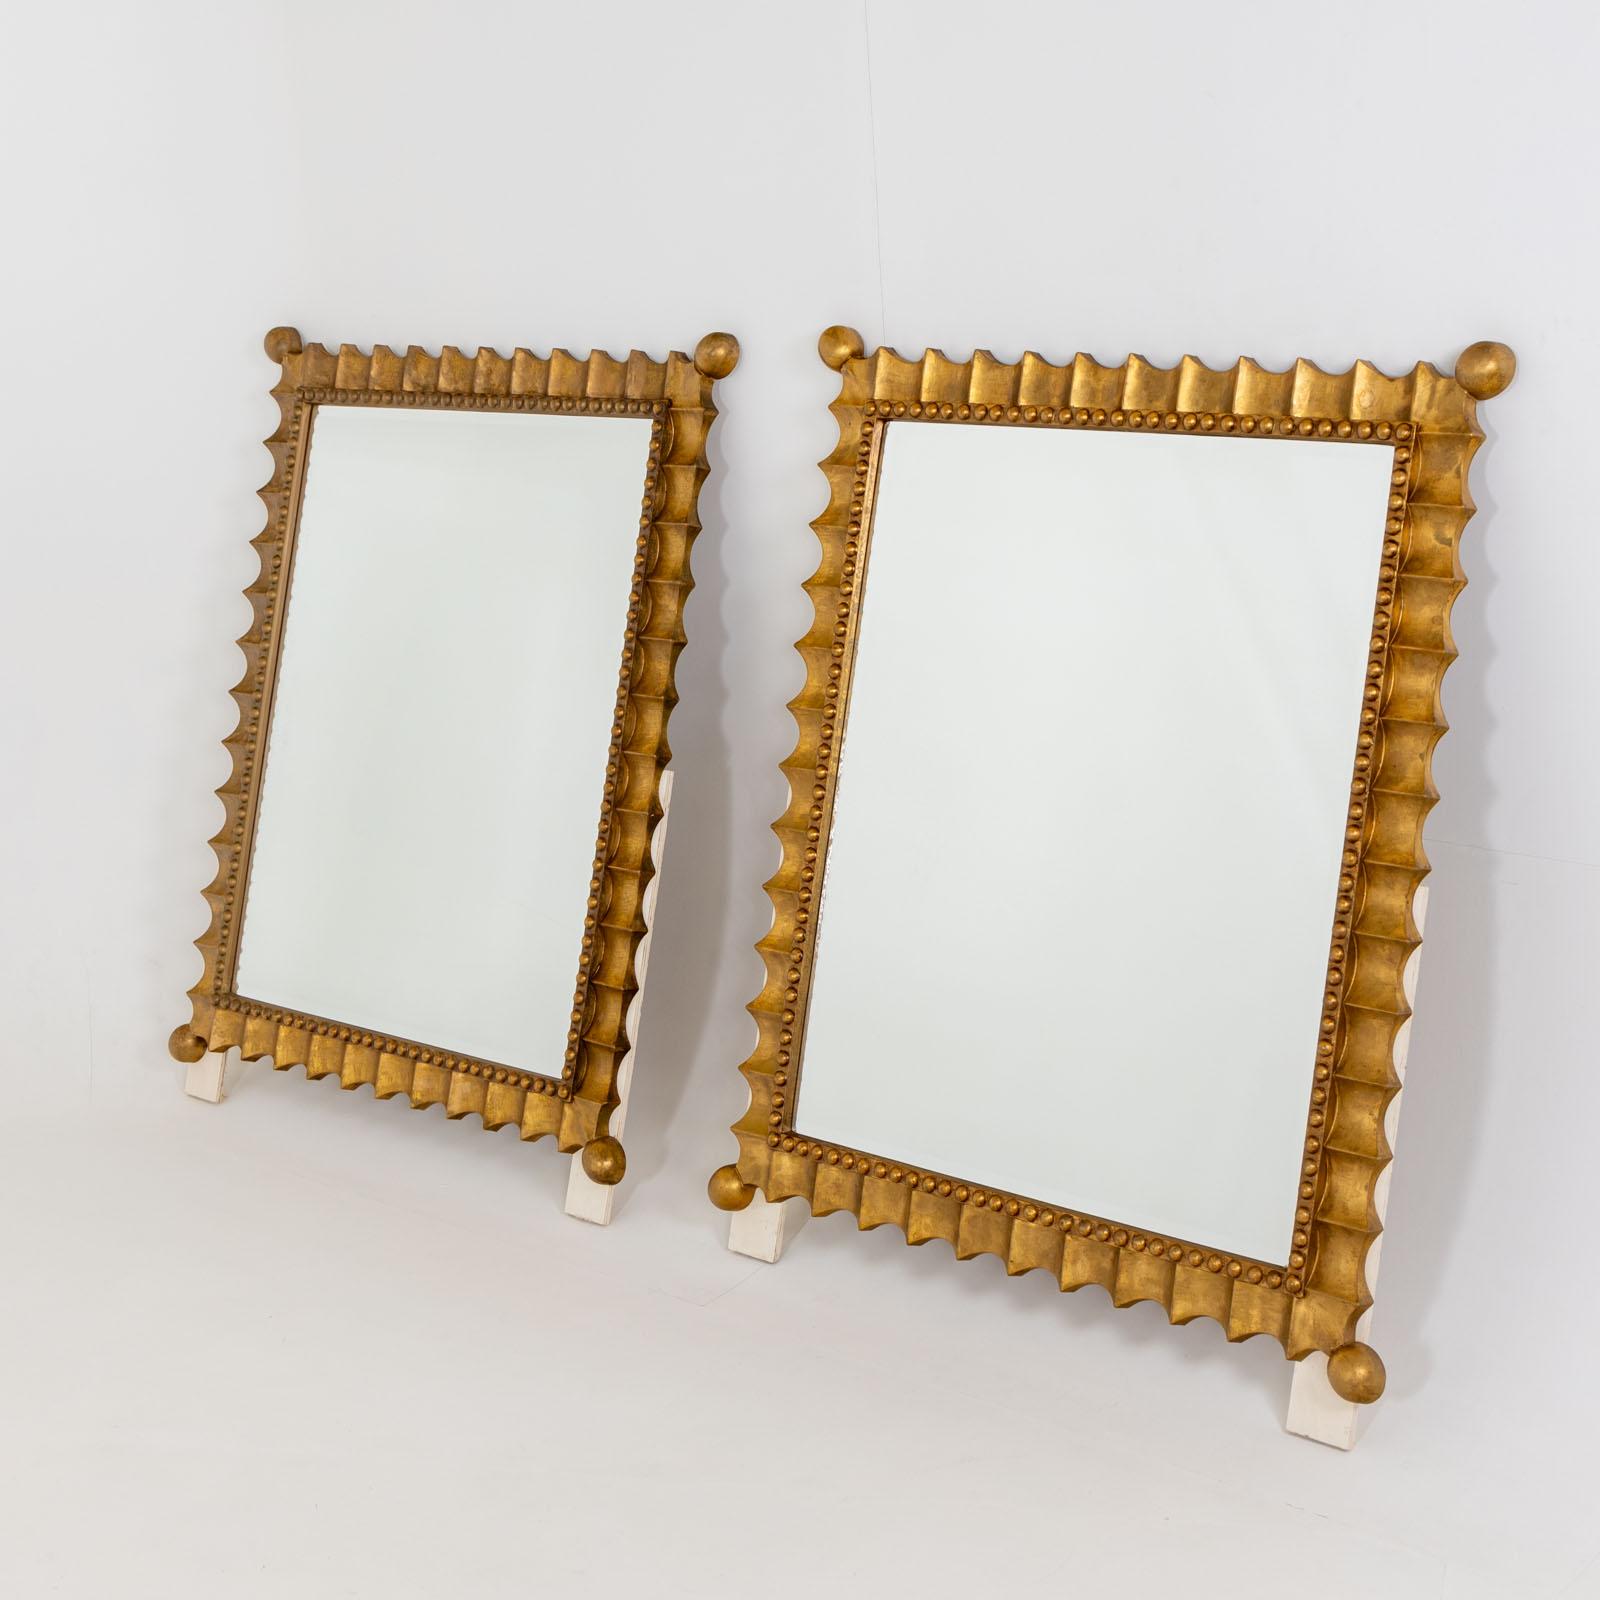 A large pair of gold-patinated Scalloped Wall Mirrors, Mid-20th Century. These impressive wall mirrors feature gold-patinated frames with a distinctive wavy edge adorned with pearl decoration. The corners elegantly terminate in spheres, adding a